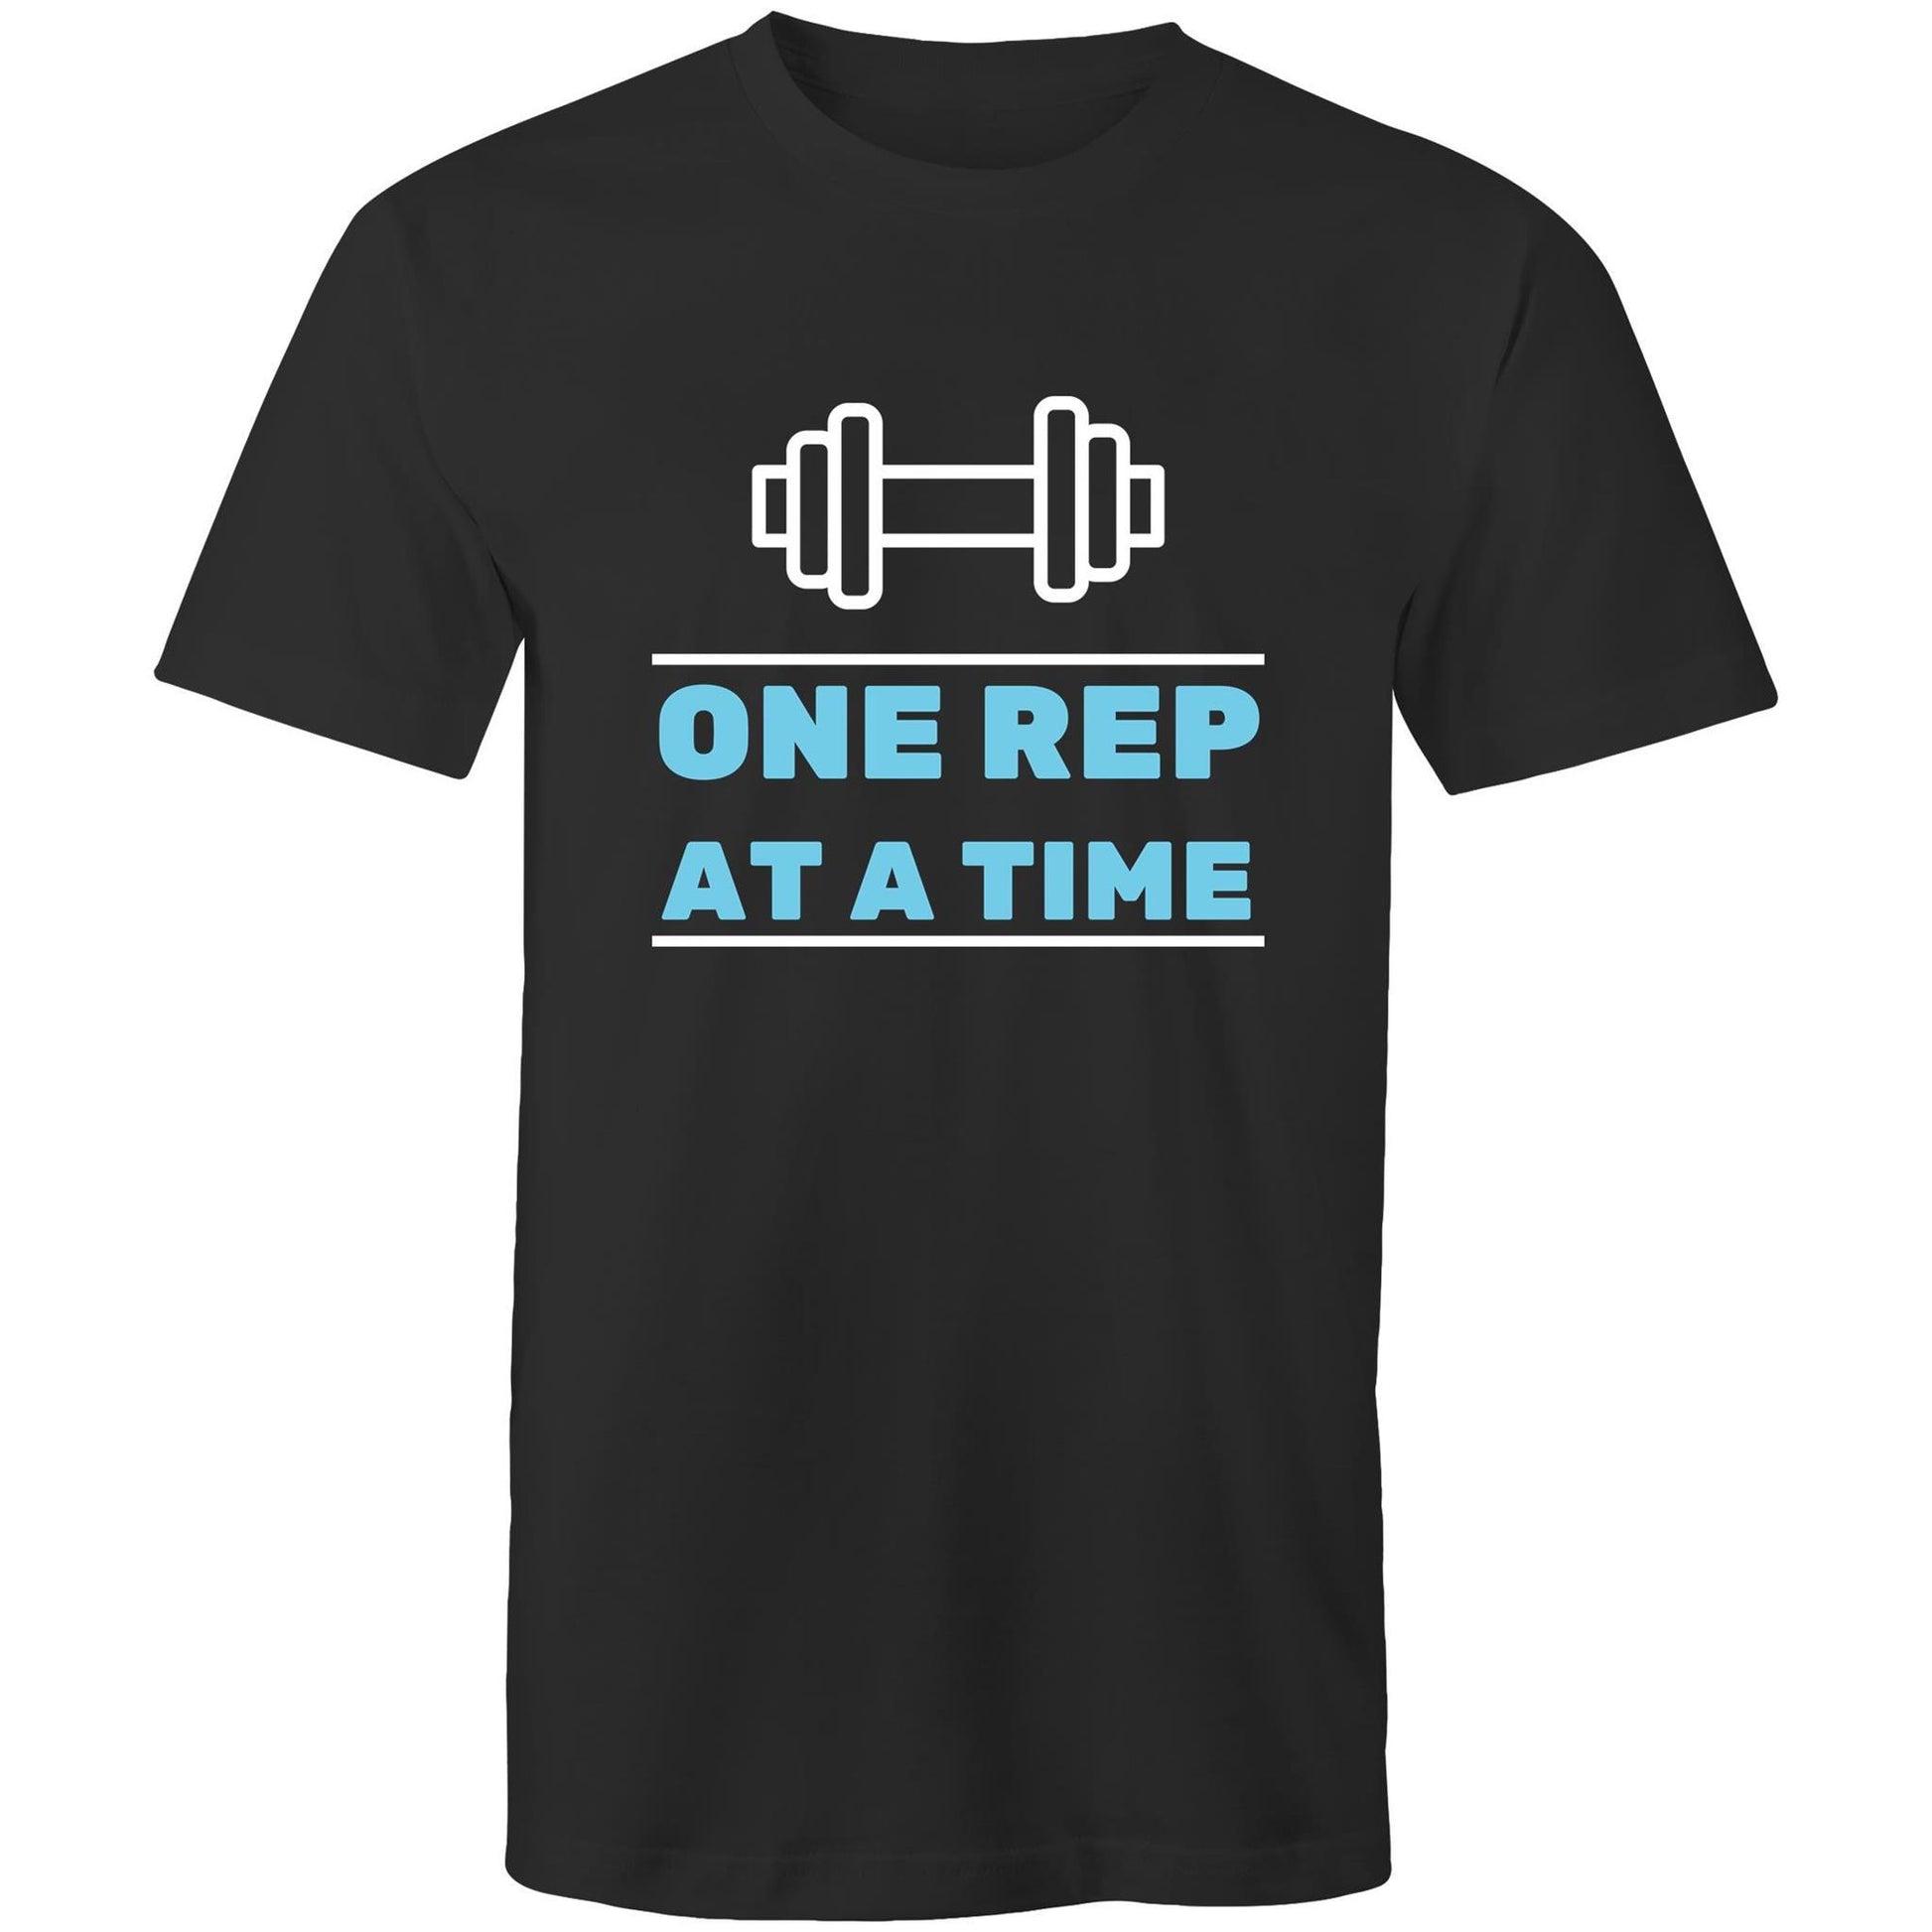 One Rep At A Time - Short Sleeve T-shirt Black Fitness T-shirt Fitness Mens Womens